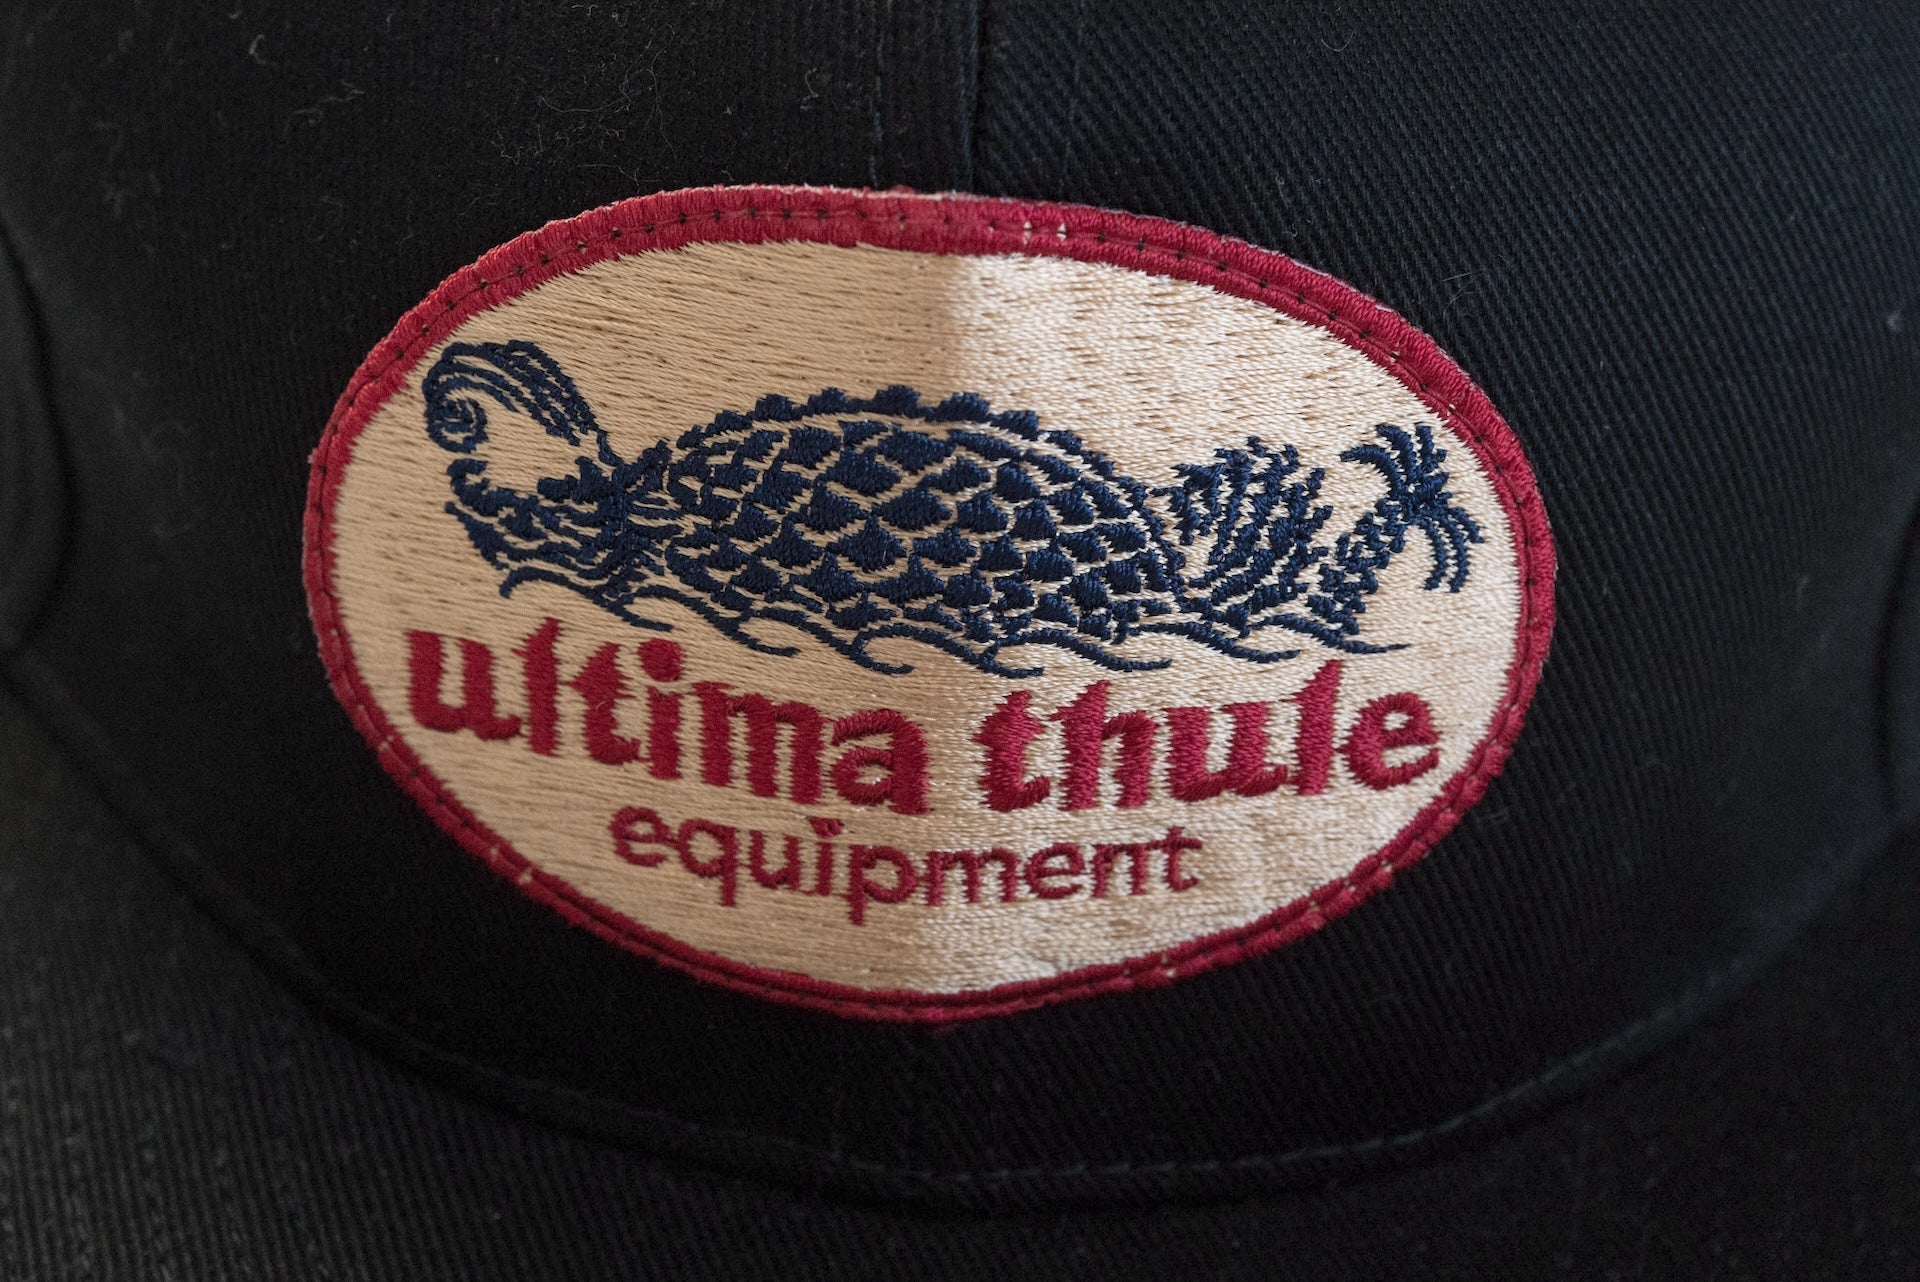 Ultima Thule by Freewheelers "Ancient Monster" Crest Vent Cap (Black)